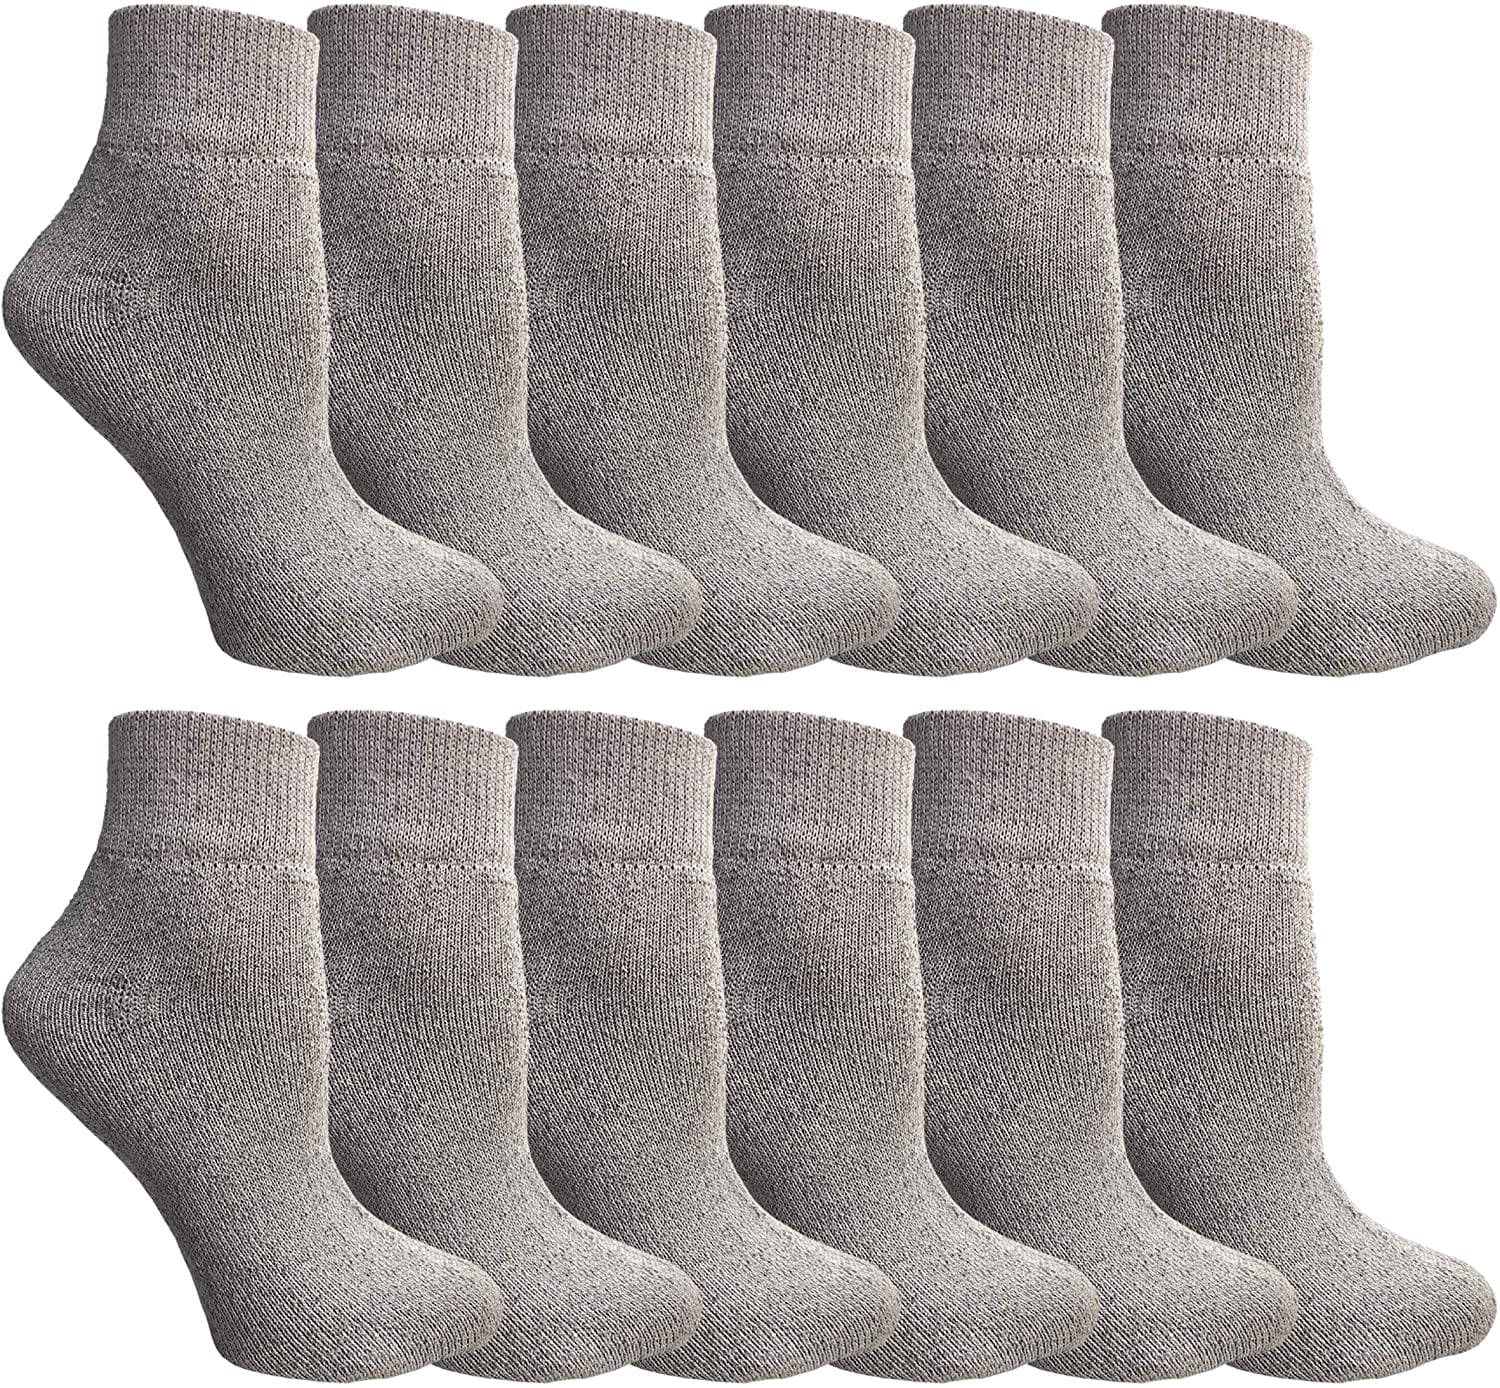 Bulk Wholesale Packs Womens Classic Low Cut Ankle Socks 6-8 Available in Black and White 